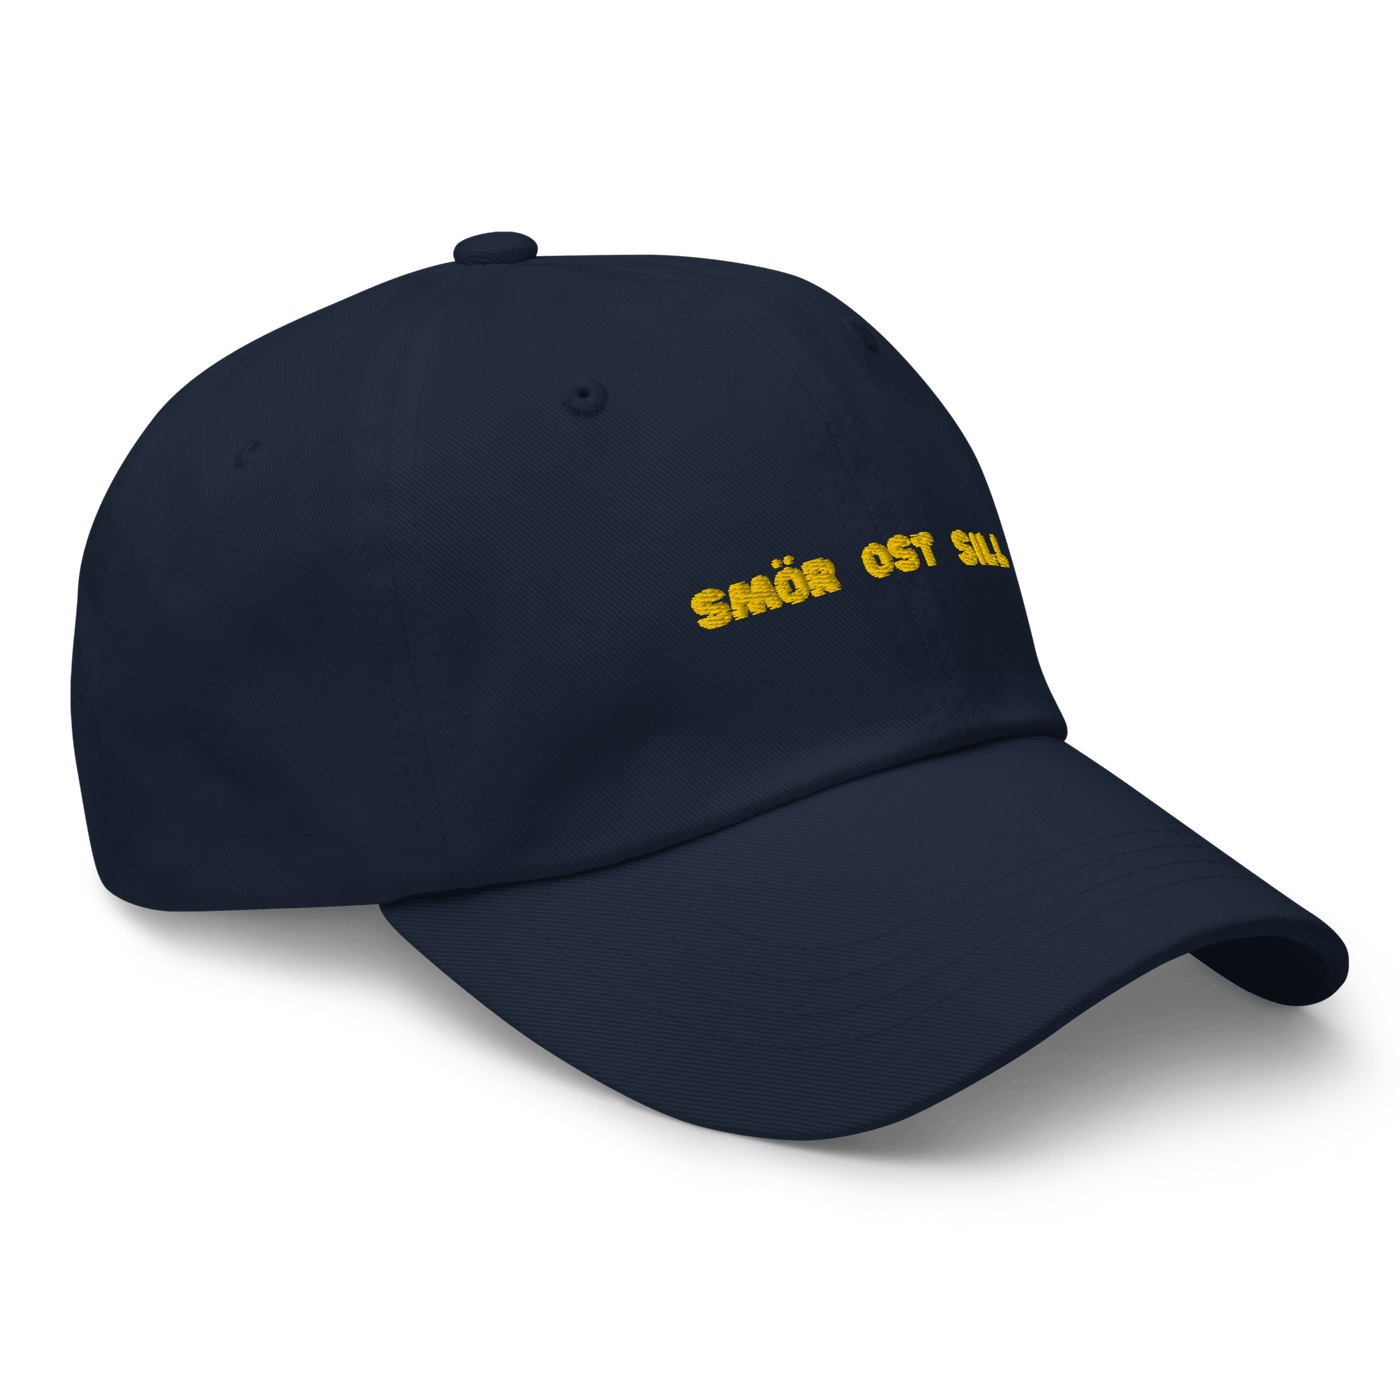 SOS Dad hat - Black - Just Another Cap Store